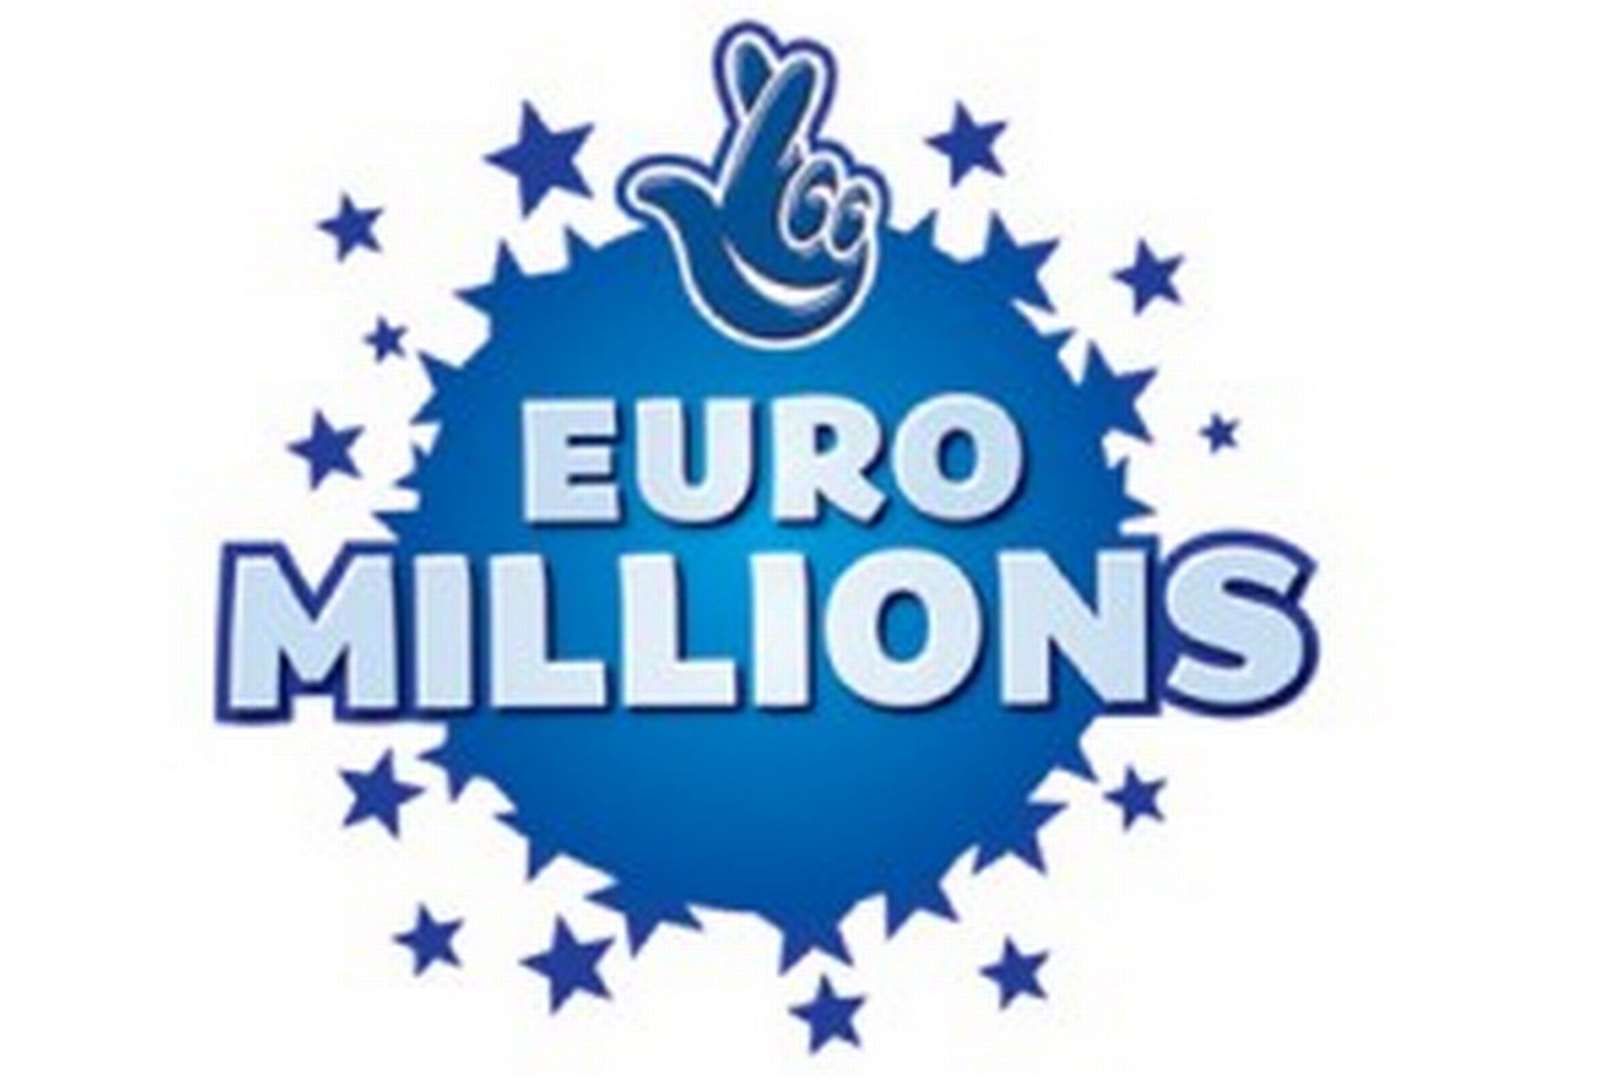 Friday's Euromillions draw will take place at 8.45pm